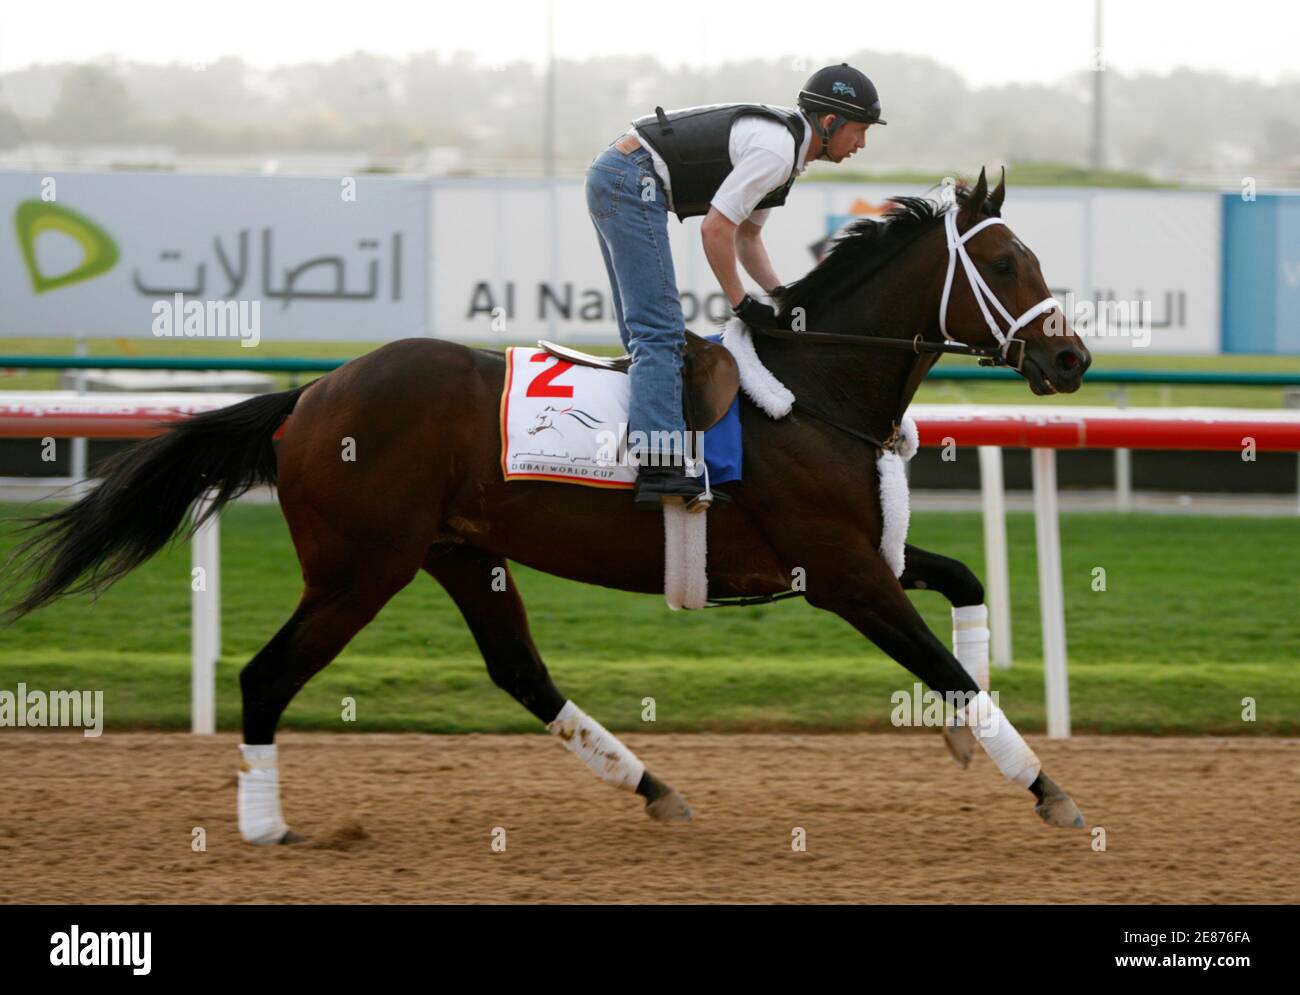 Invasor from the U.S. gallops during morning training at the Nad al Sheba race track in Dubai March 29, 2007. The Dubai World Cup horse race with a purse of $6,000,000 will take place March 31.  REUTERS/Caren Firouz  (UNITED ARAB EMIRATES) Stock Photo